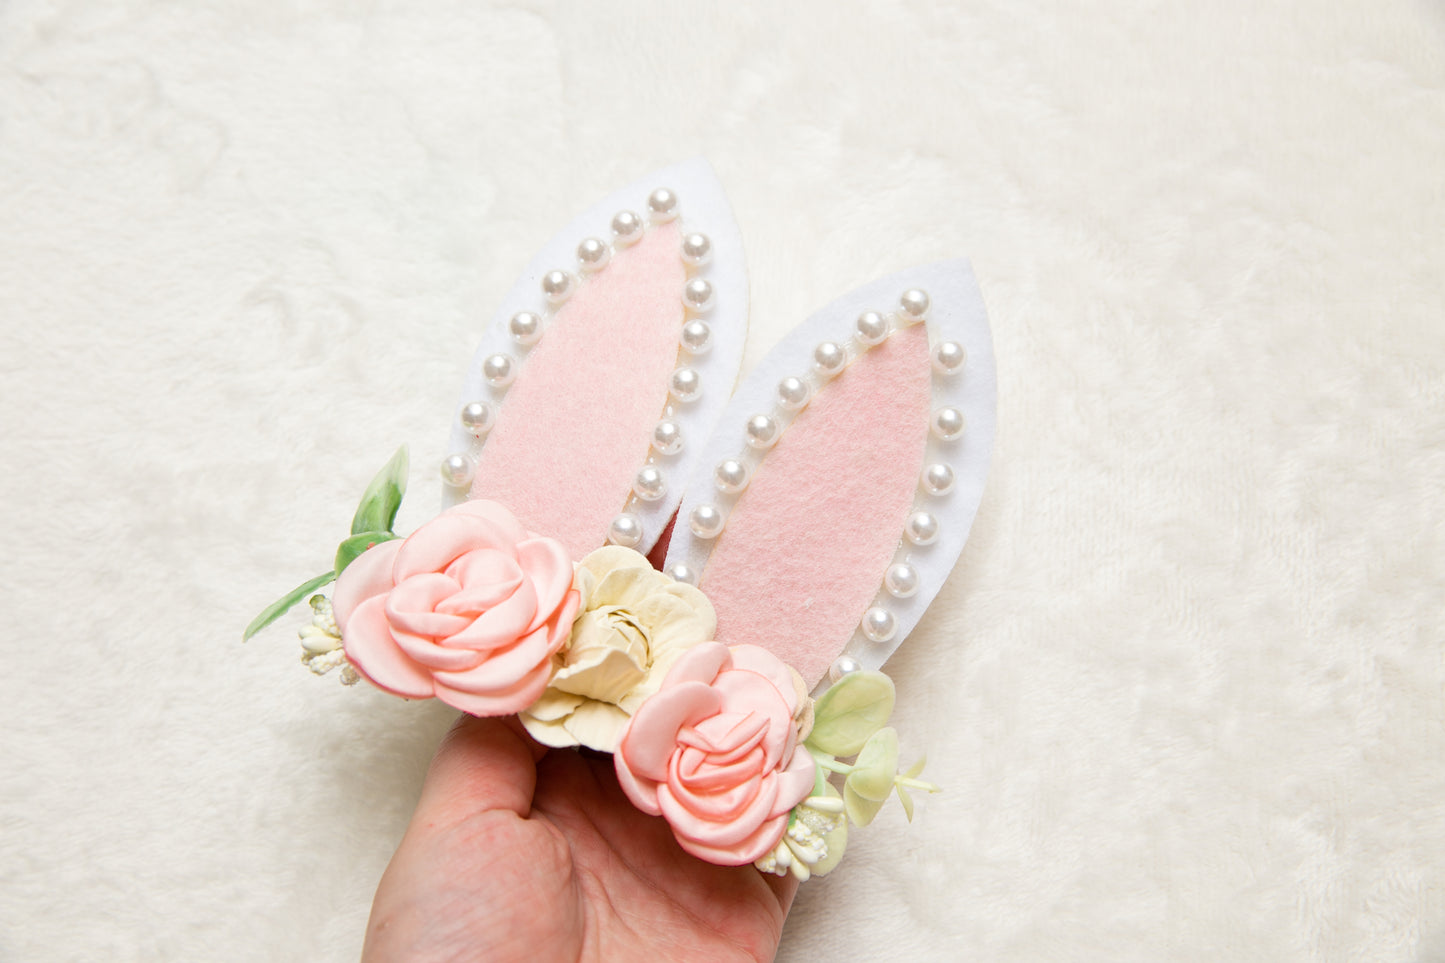 Unique Easter Bunny Ears 5 inches Extra Large headband for Baby Girl Toddler Pink Beige Pearl Easter Egg Big flower floral party gift